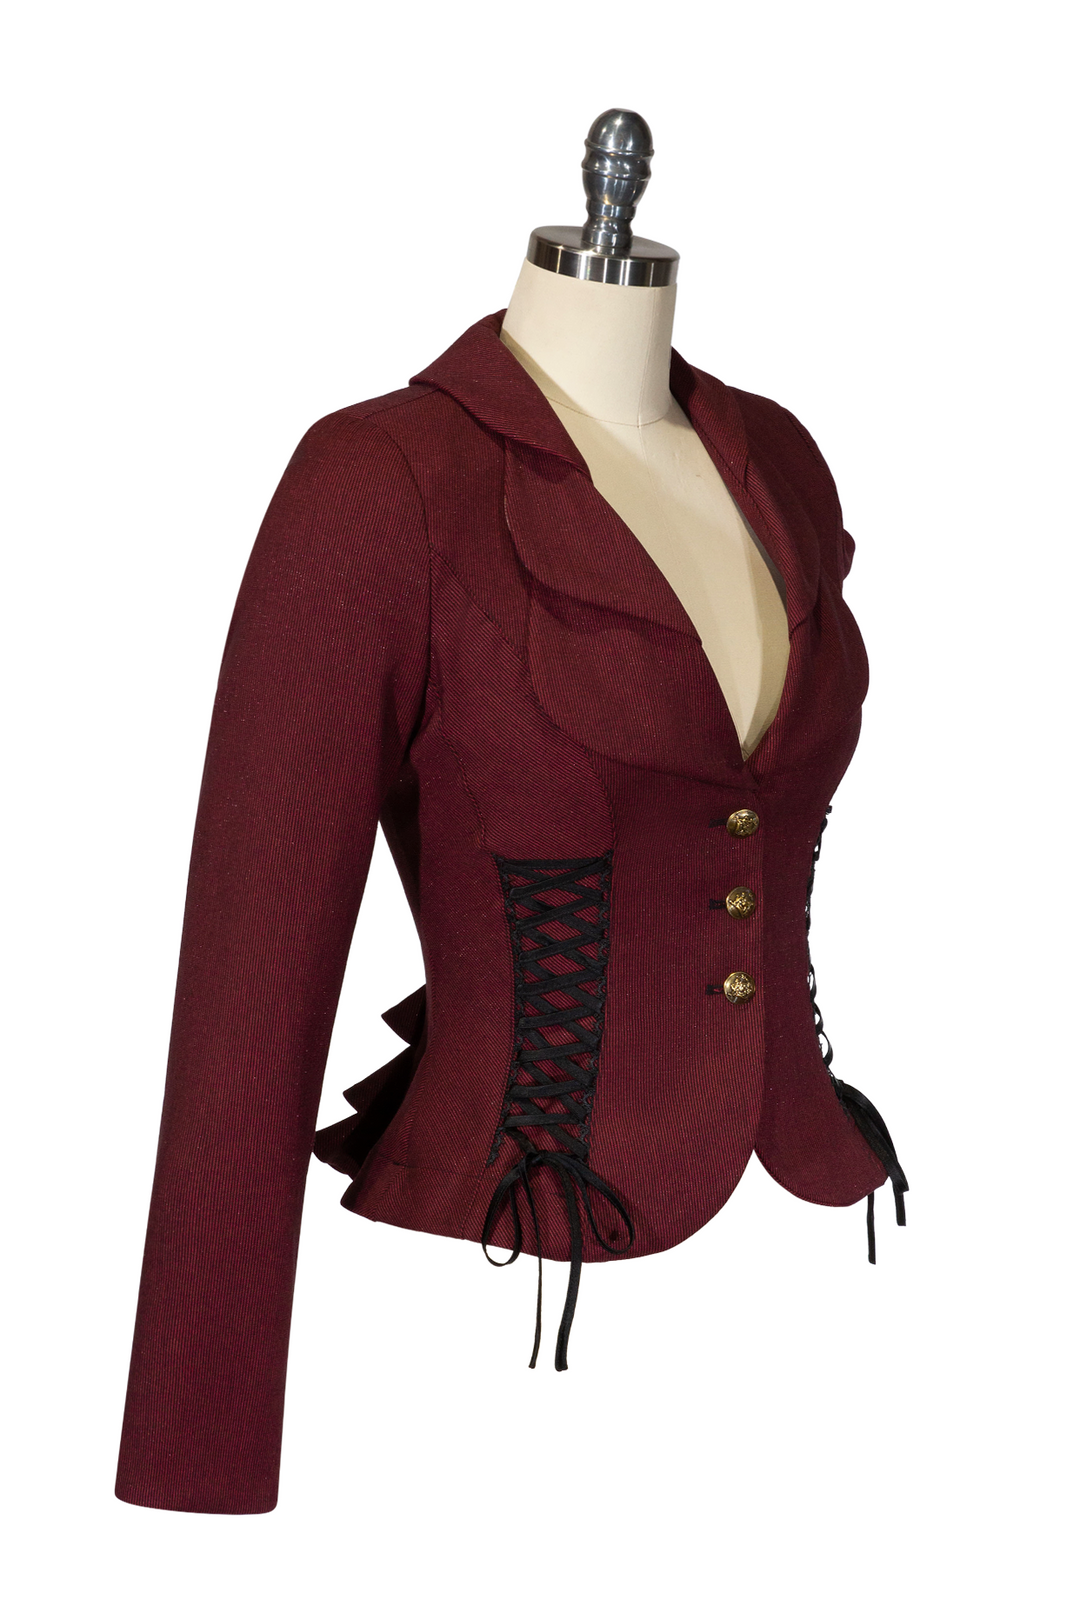 Capone Lace Up Jacket - Kitten D'Amour